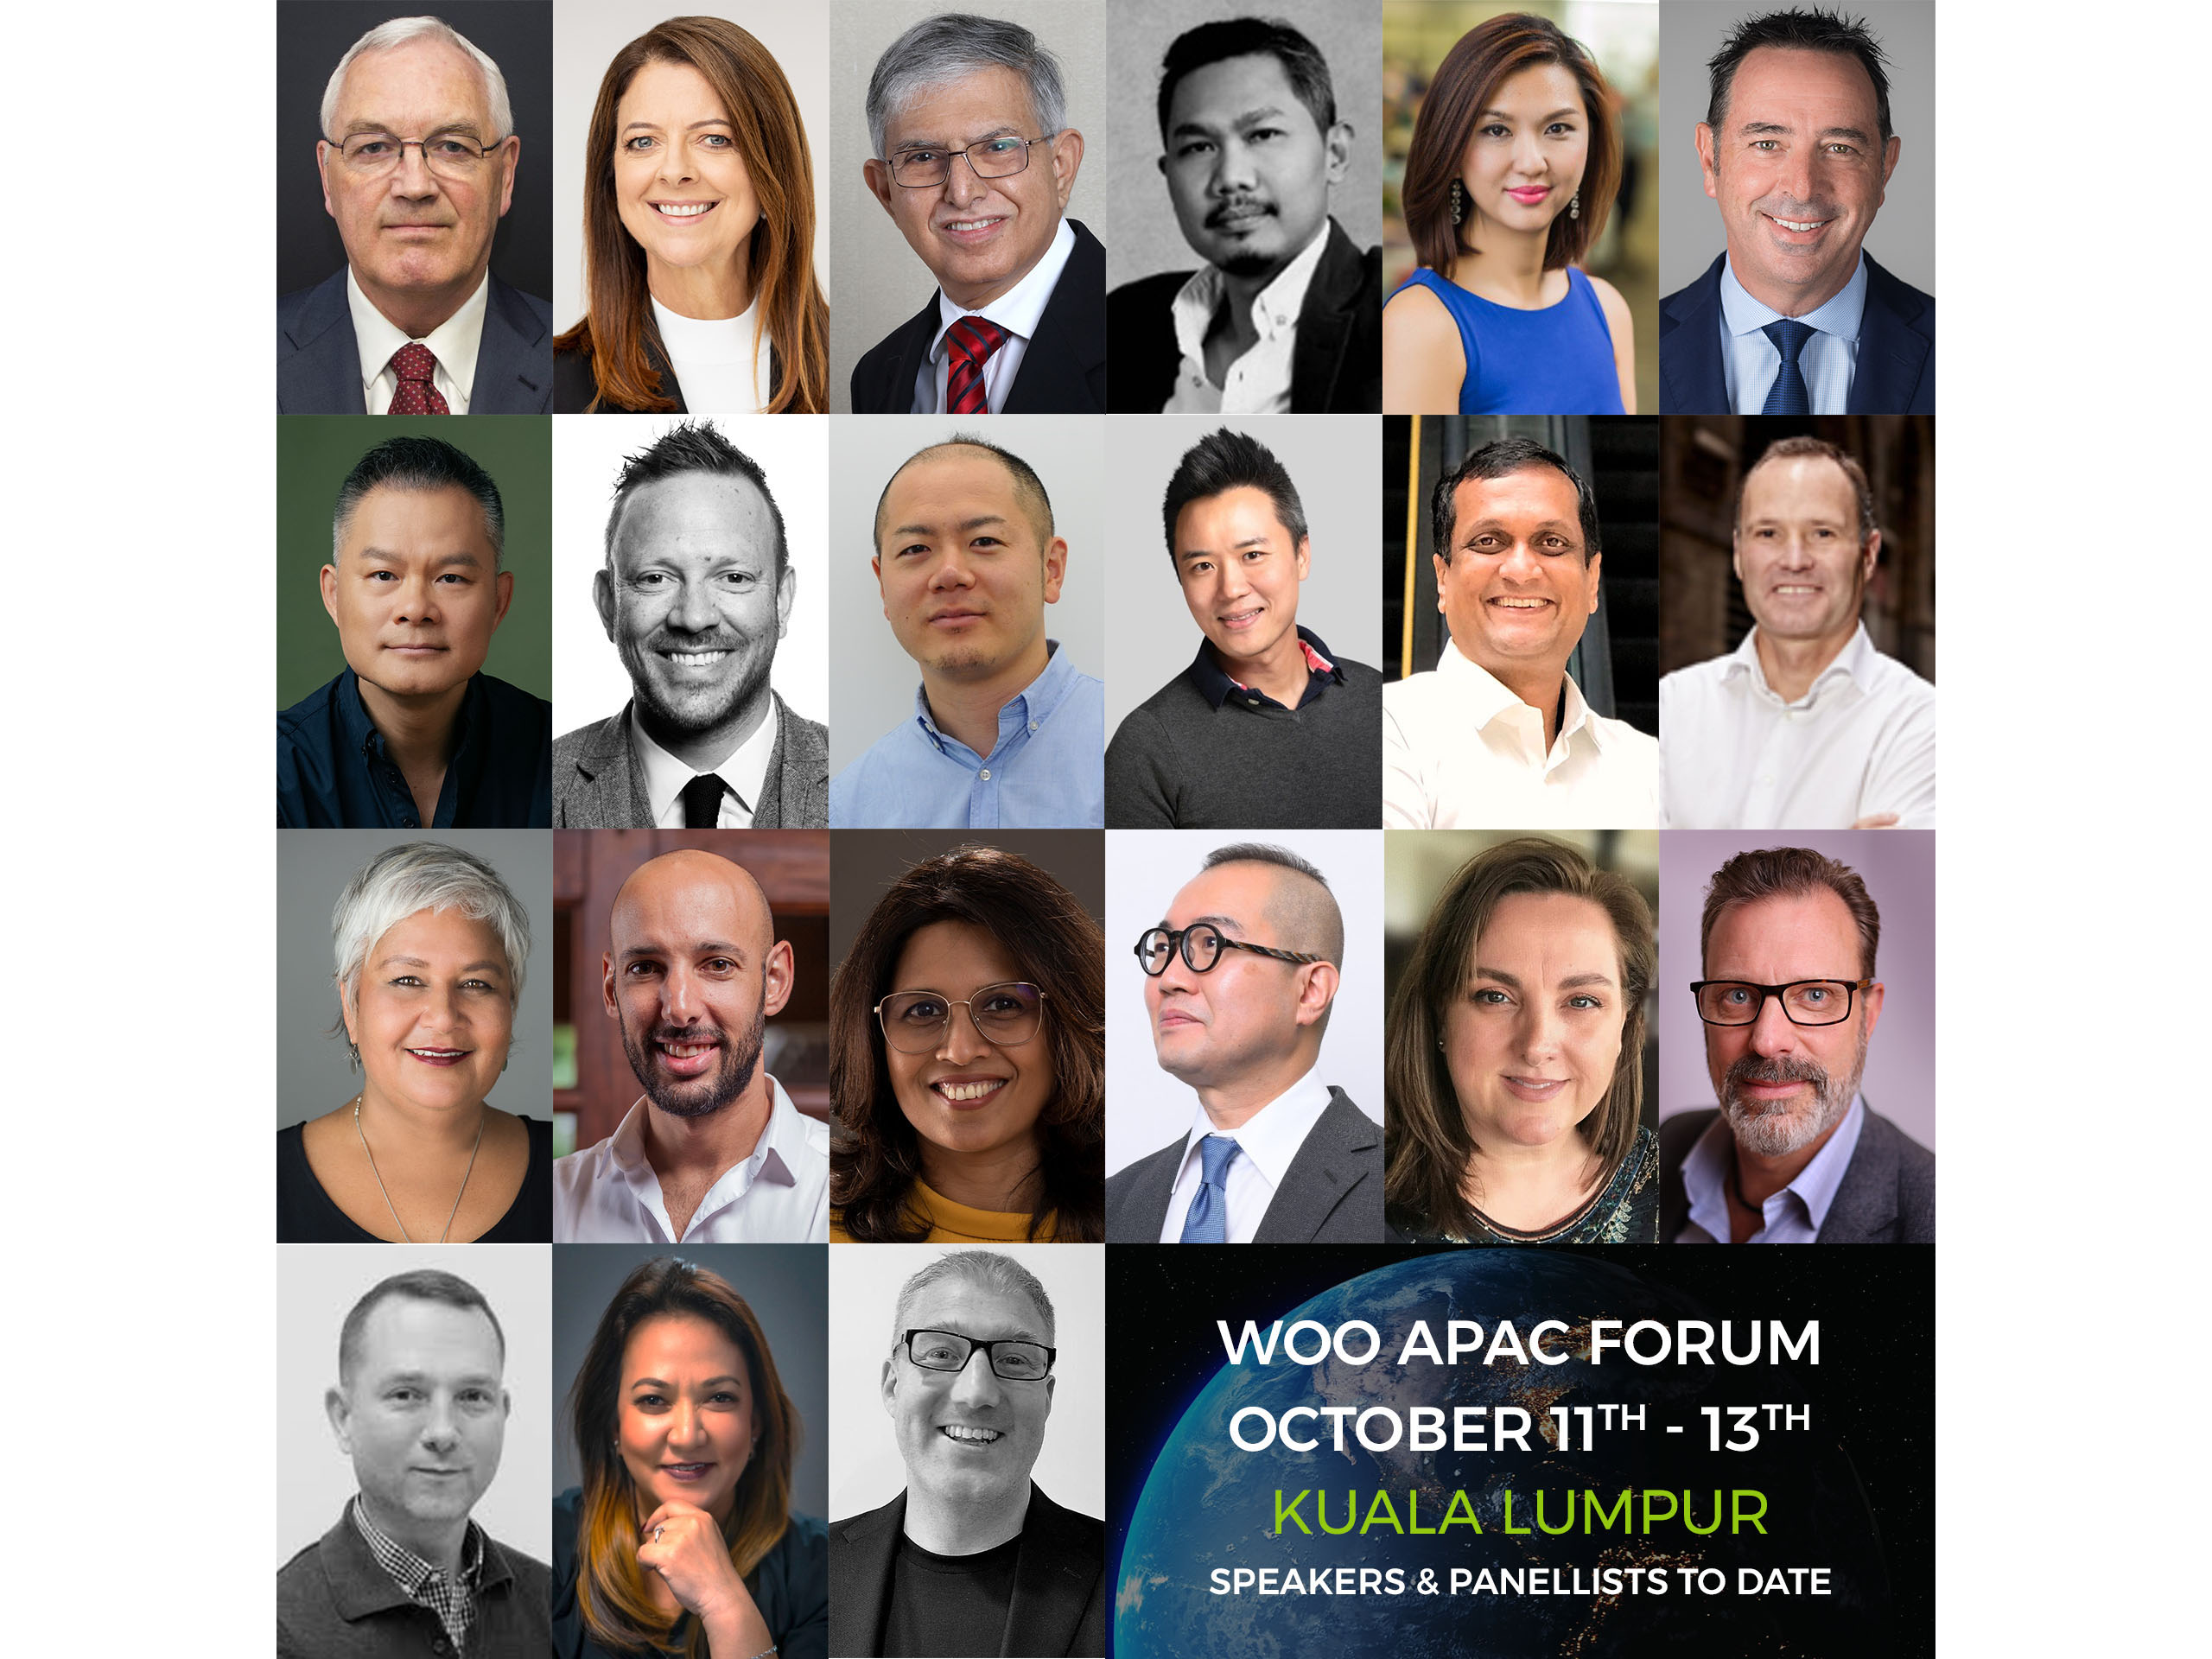 WOO APAC Forum: top speakers set to highlight development and potential of OOH in the region